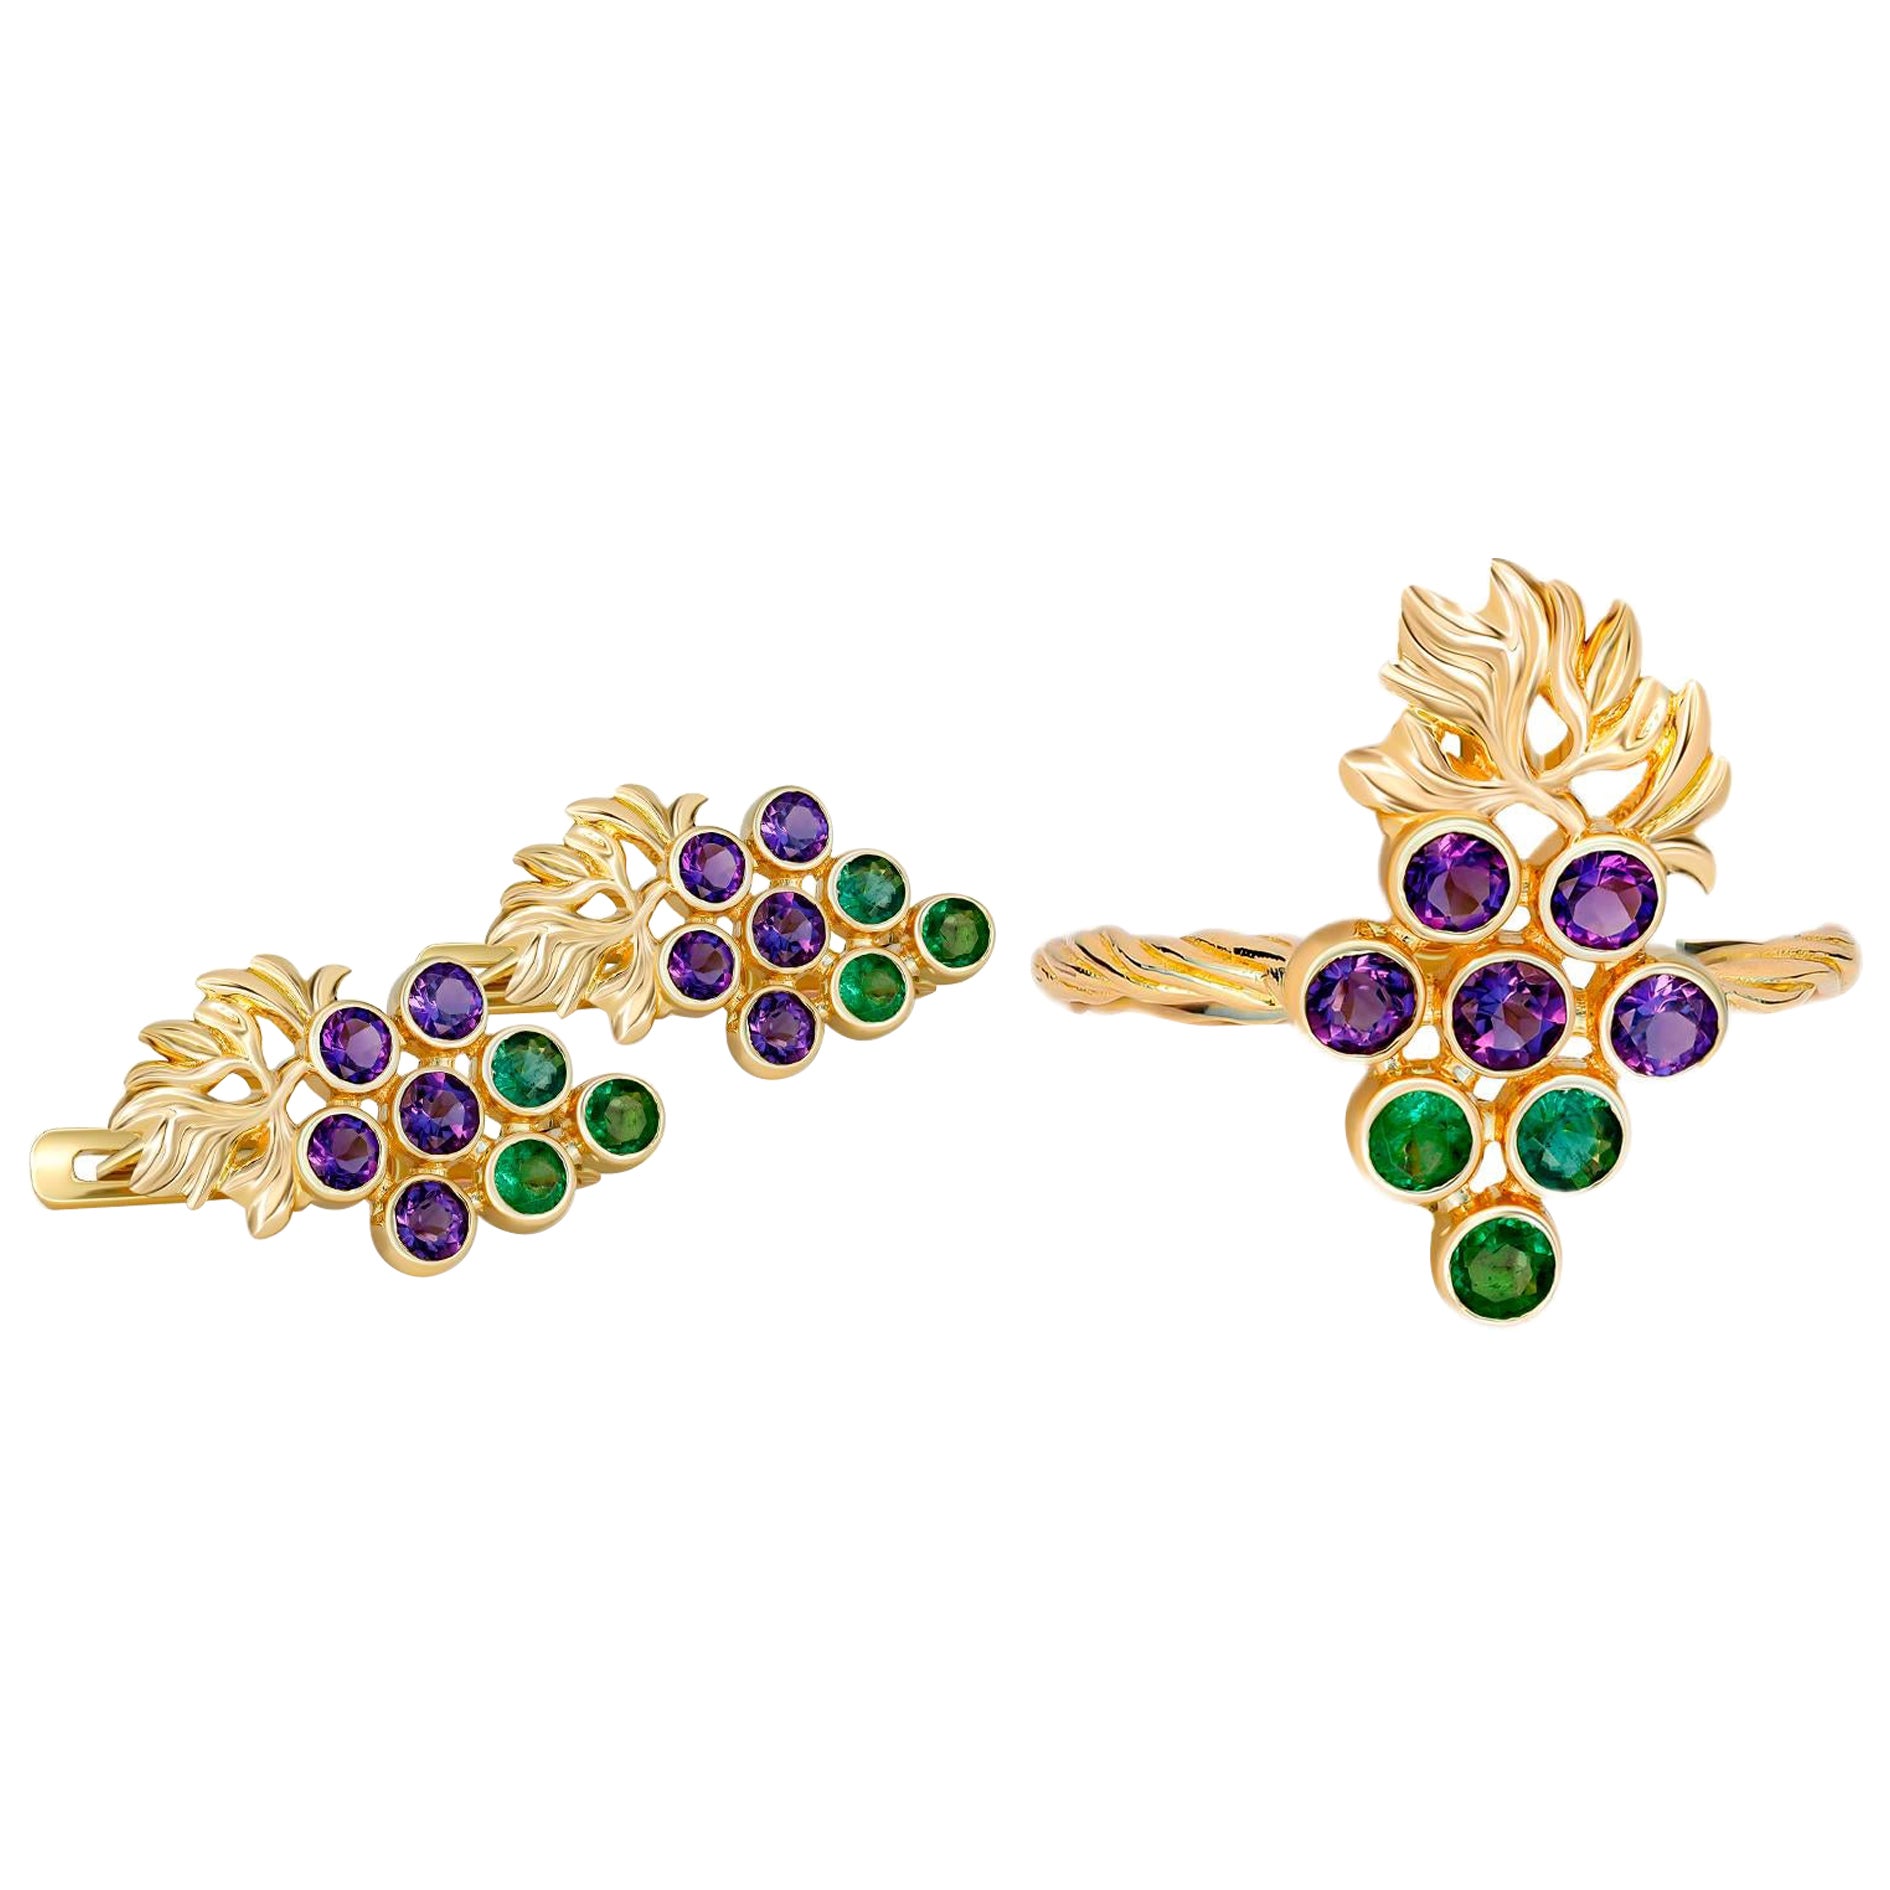 Emerald and Amethyst Set, Ring and Earrings in 14k Gold